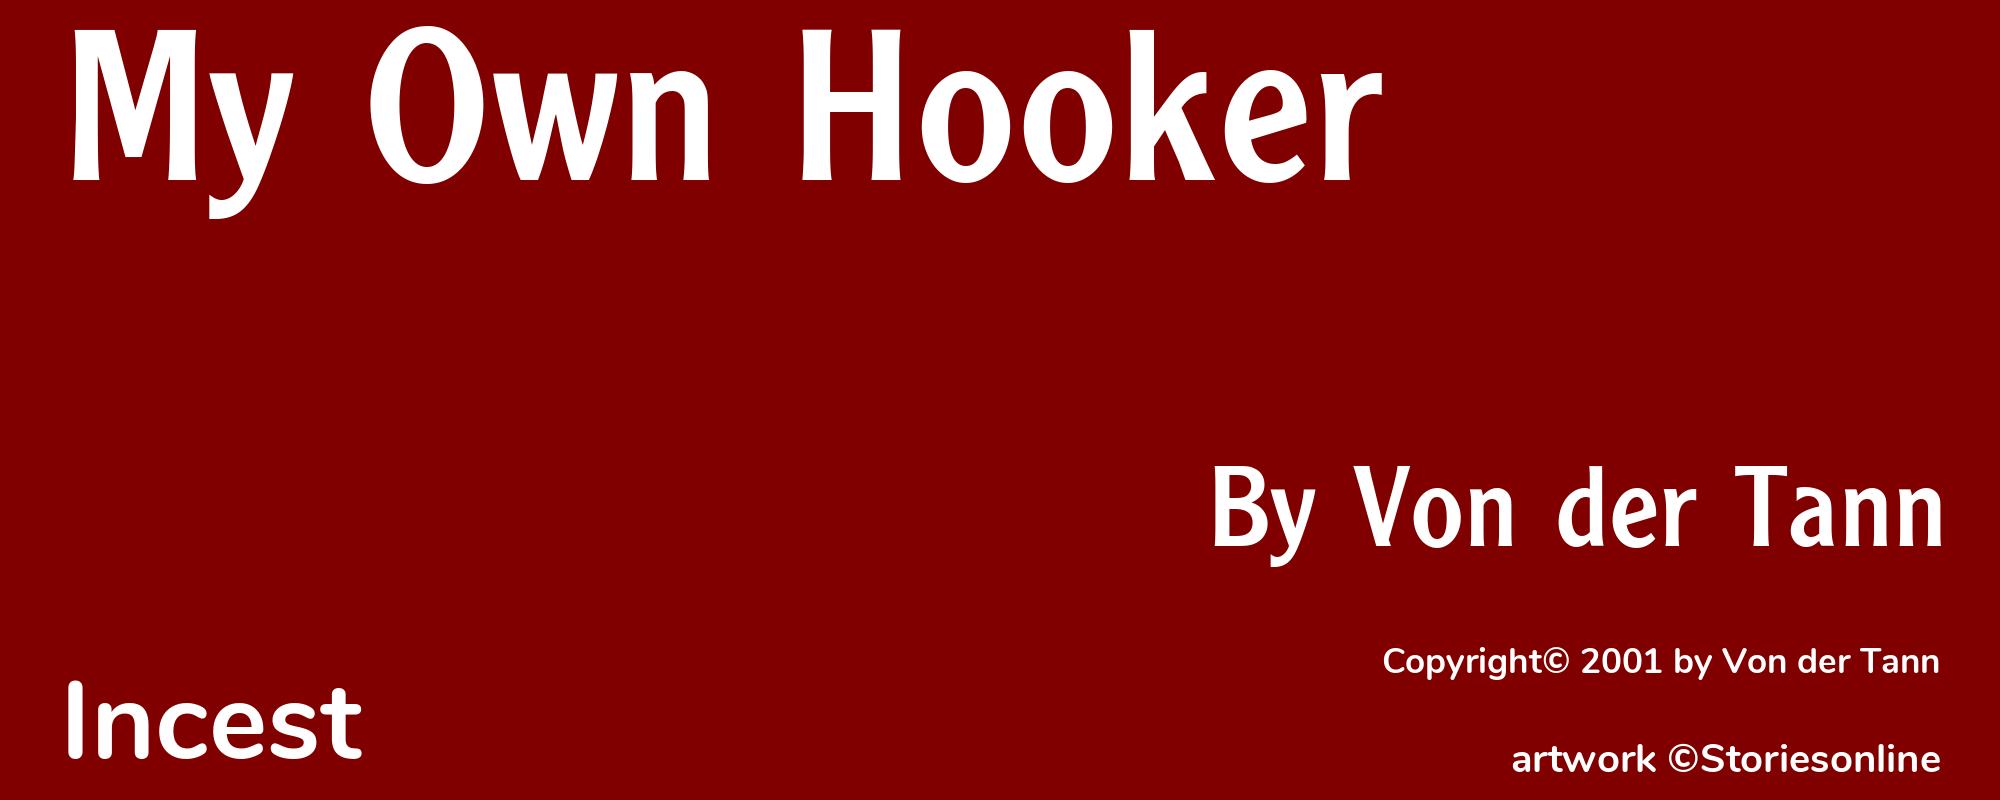 My Own Hooker - Cover